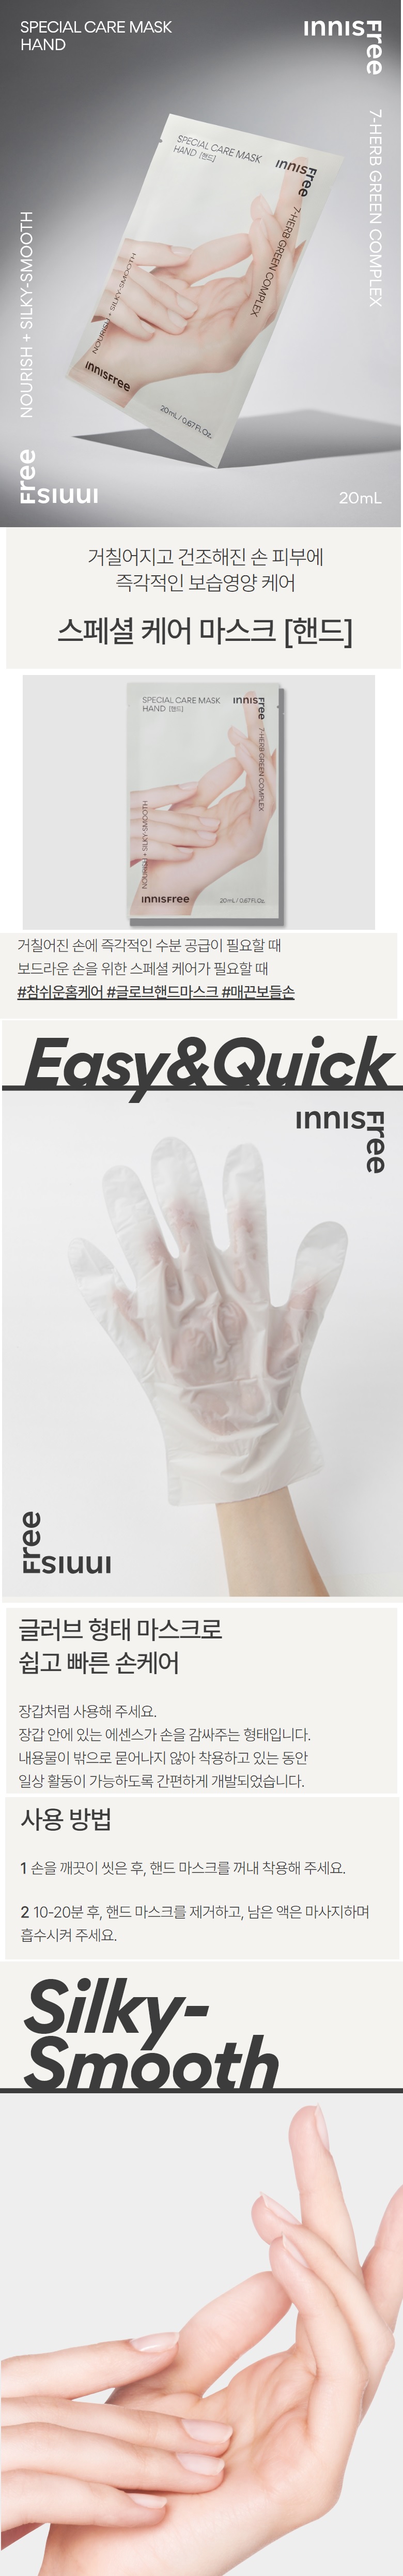 Innisfree Special Care Hand Mask Sheet korean skincare product online shop malaysia china poland1